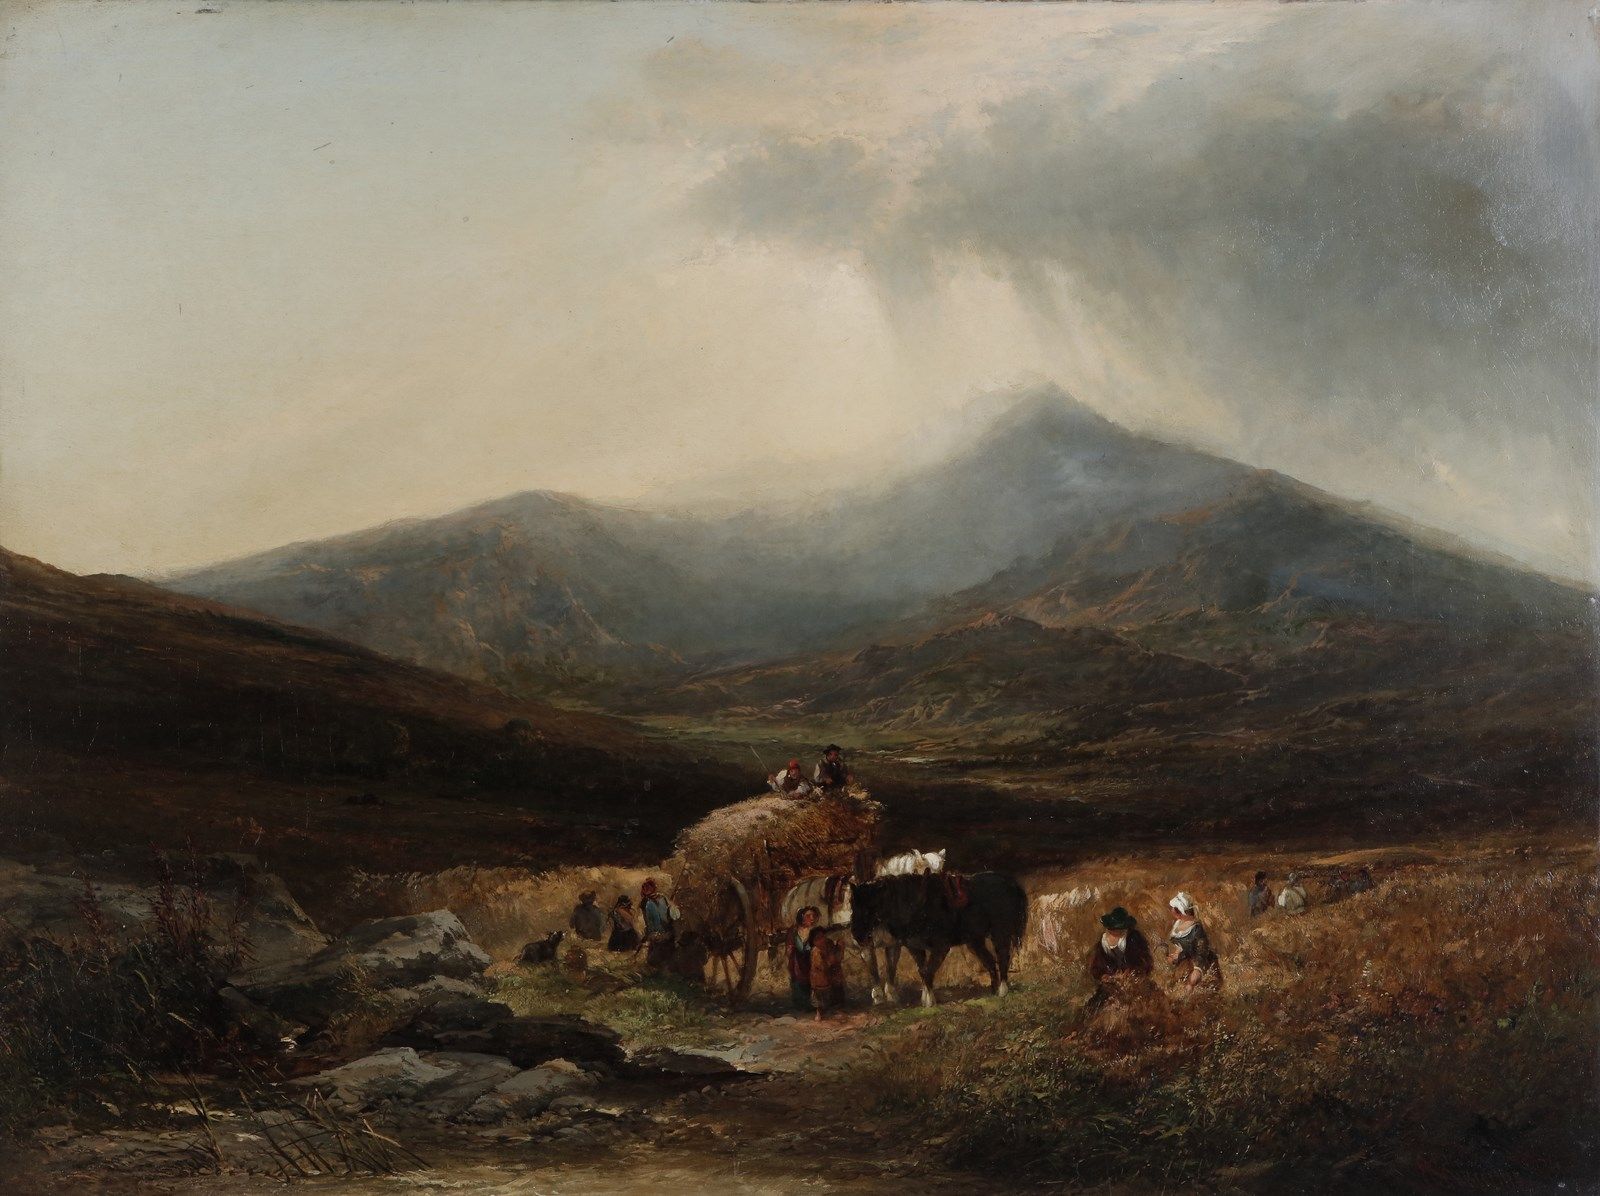 EDWARD CHARLES WILLIAMS Landscape with peasants and animals. Landscape with peas&hellip;